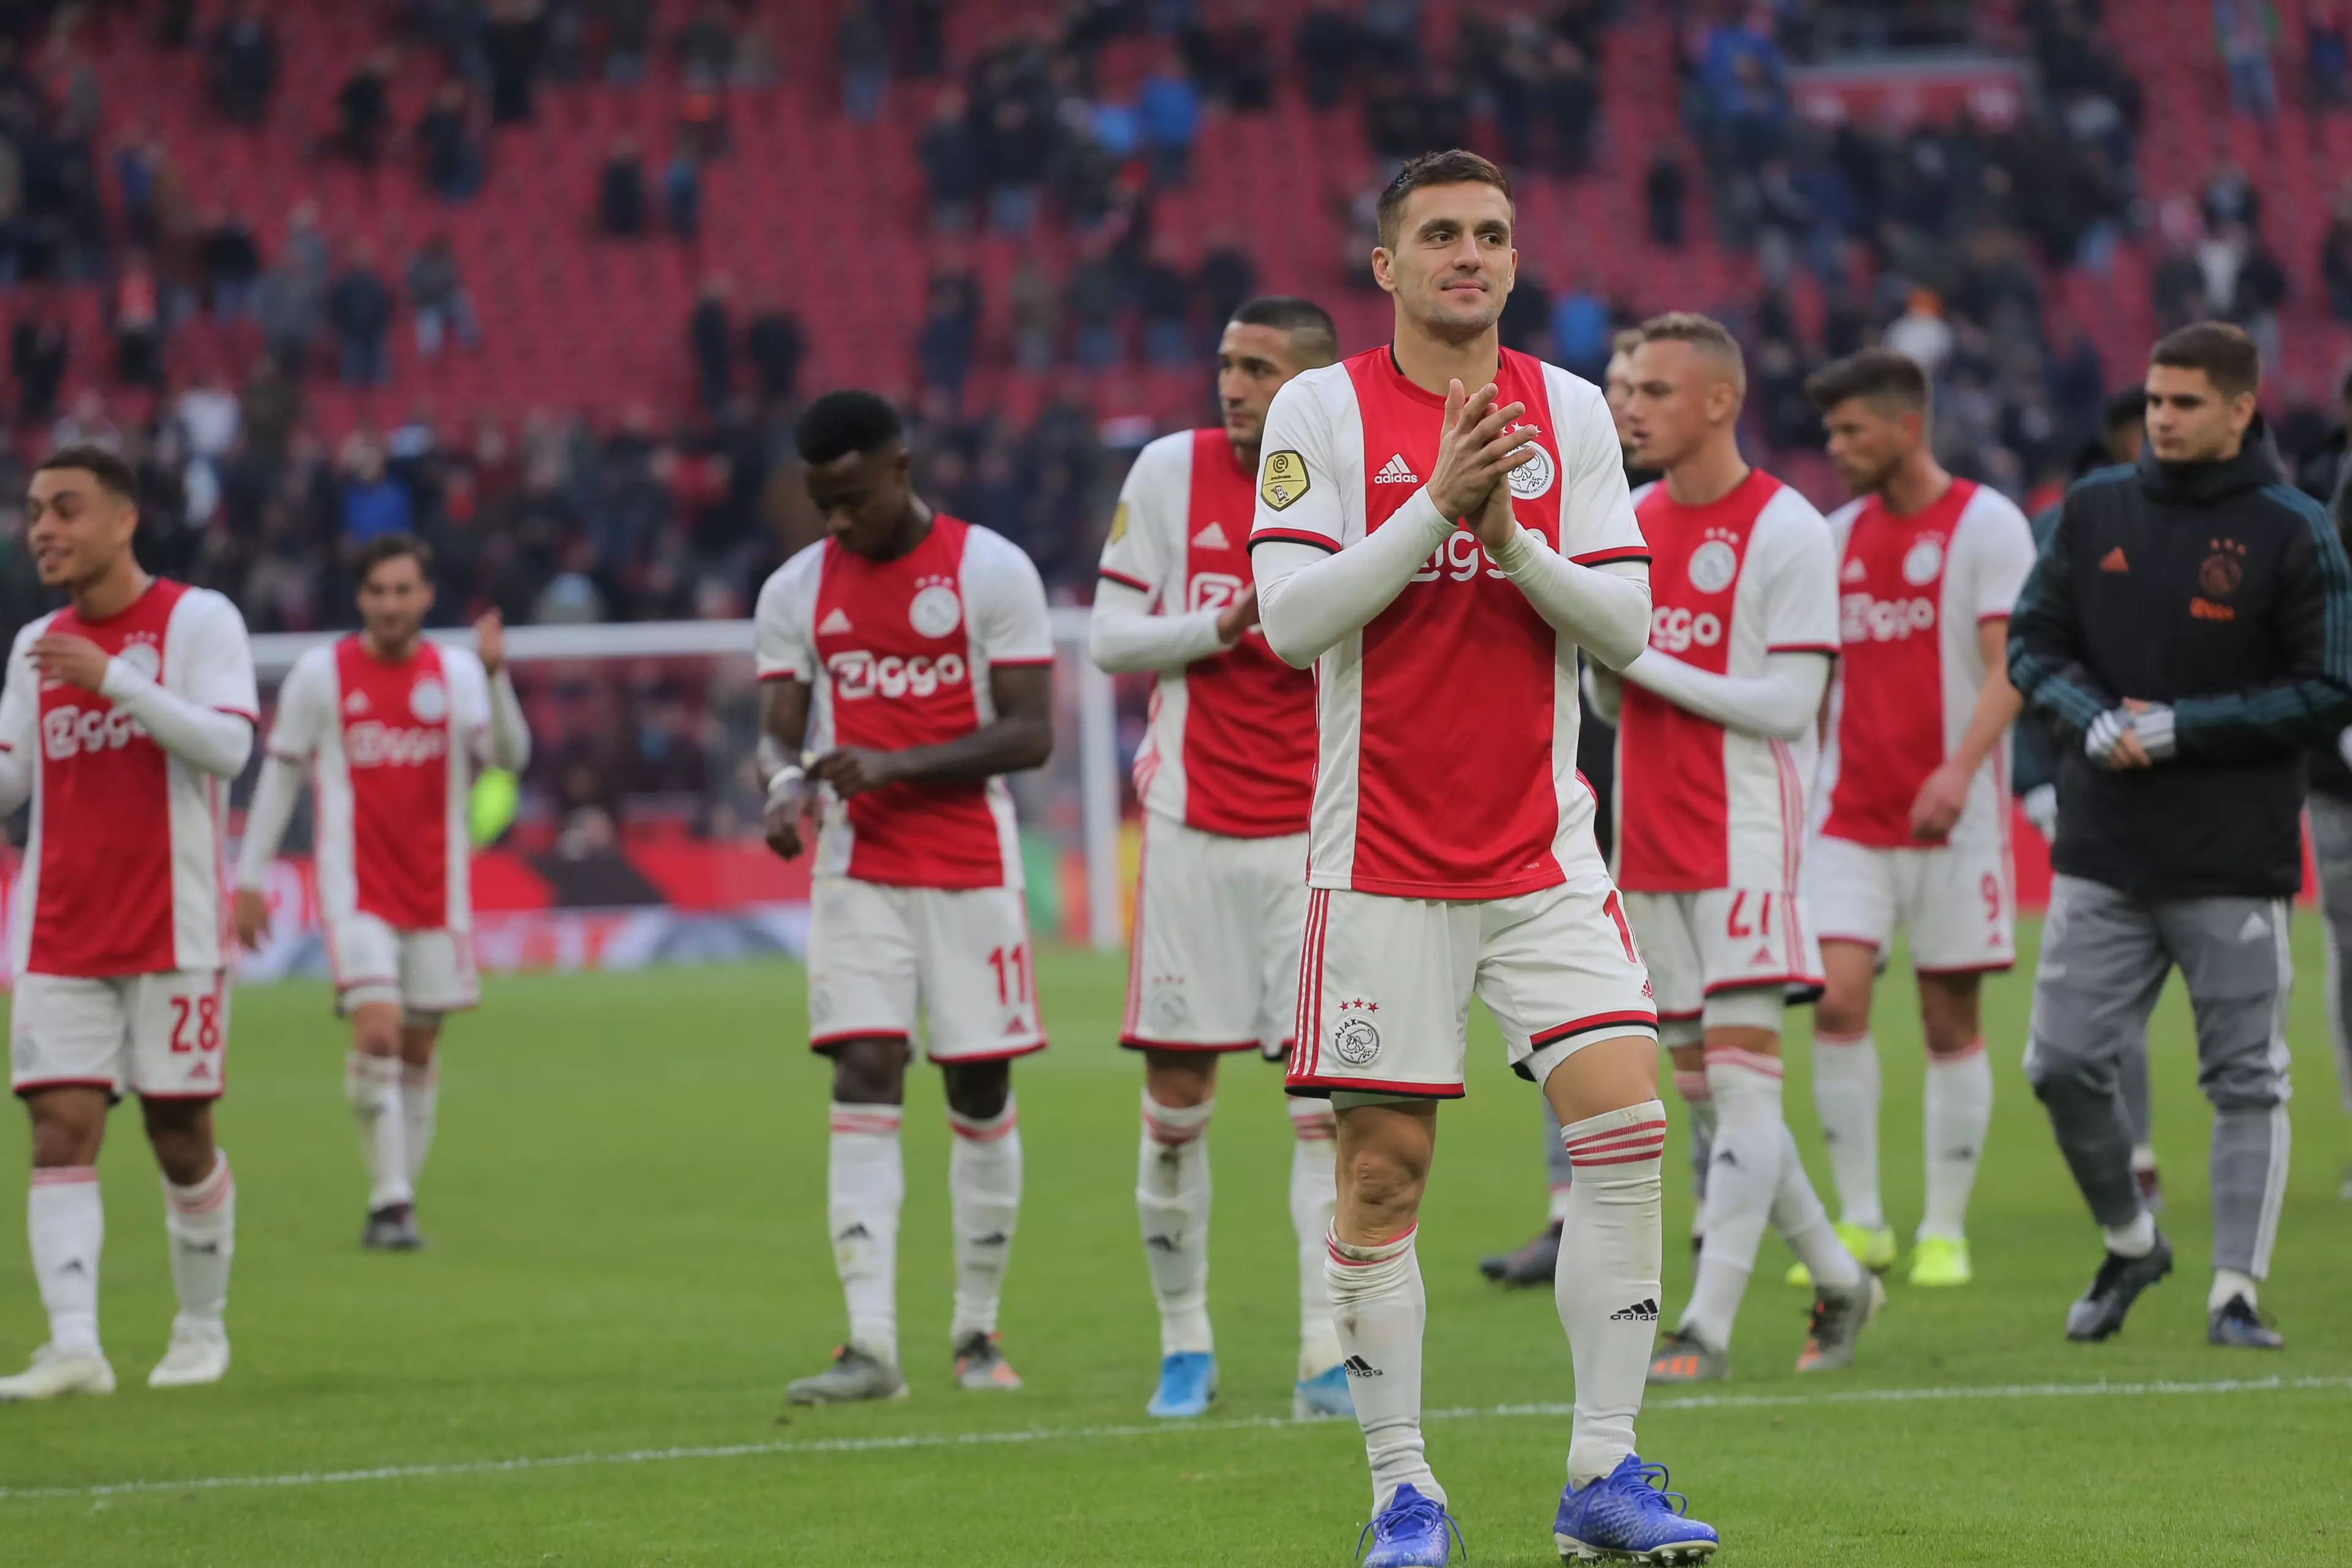 Ajax continue to impress despite losing some of their best players in the summer